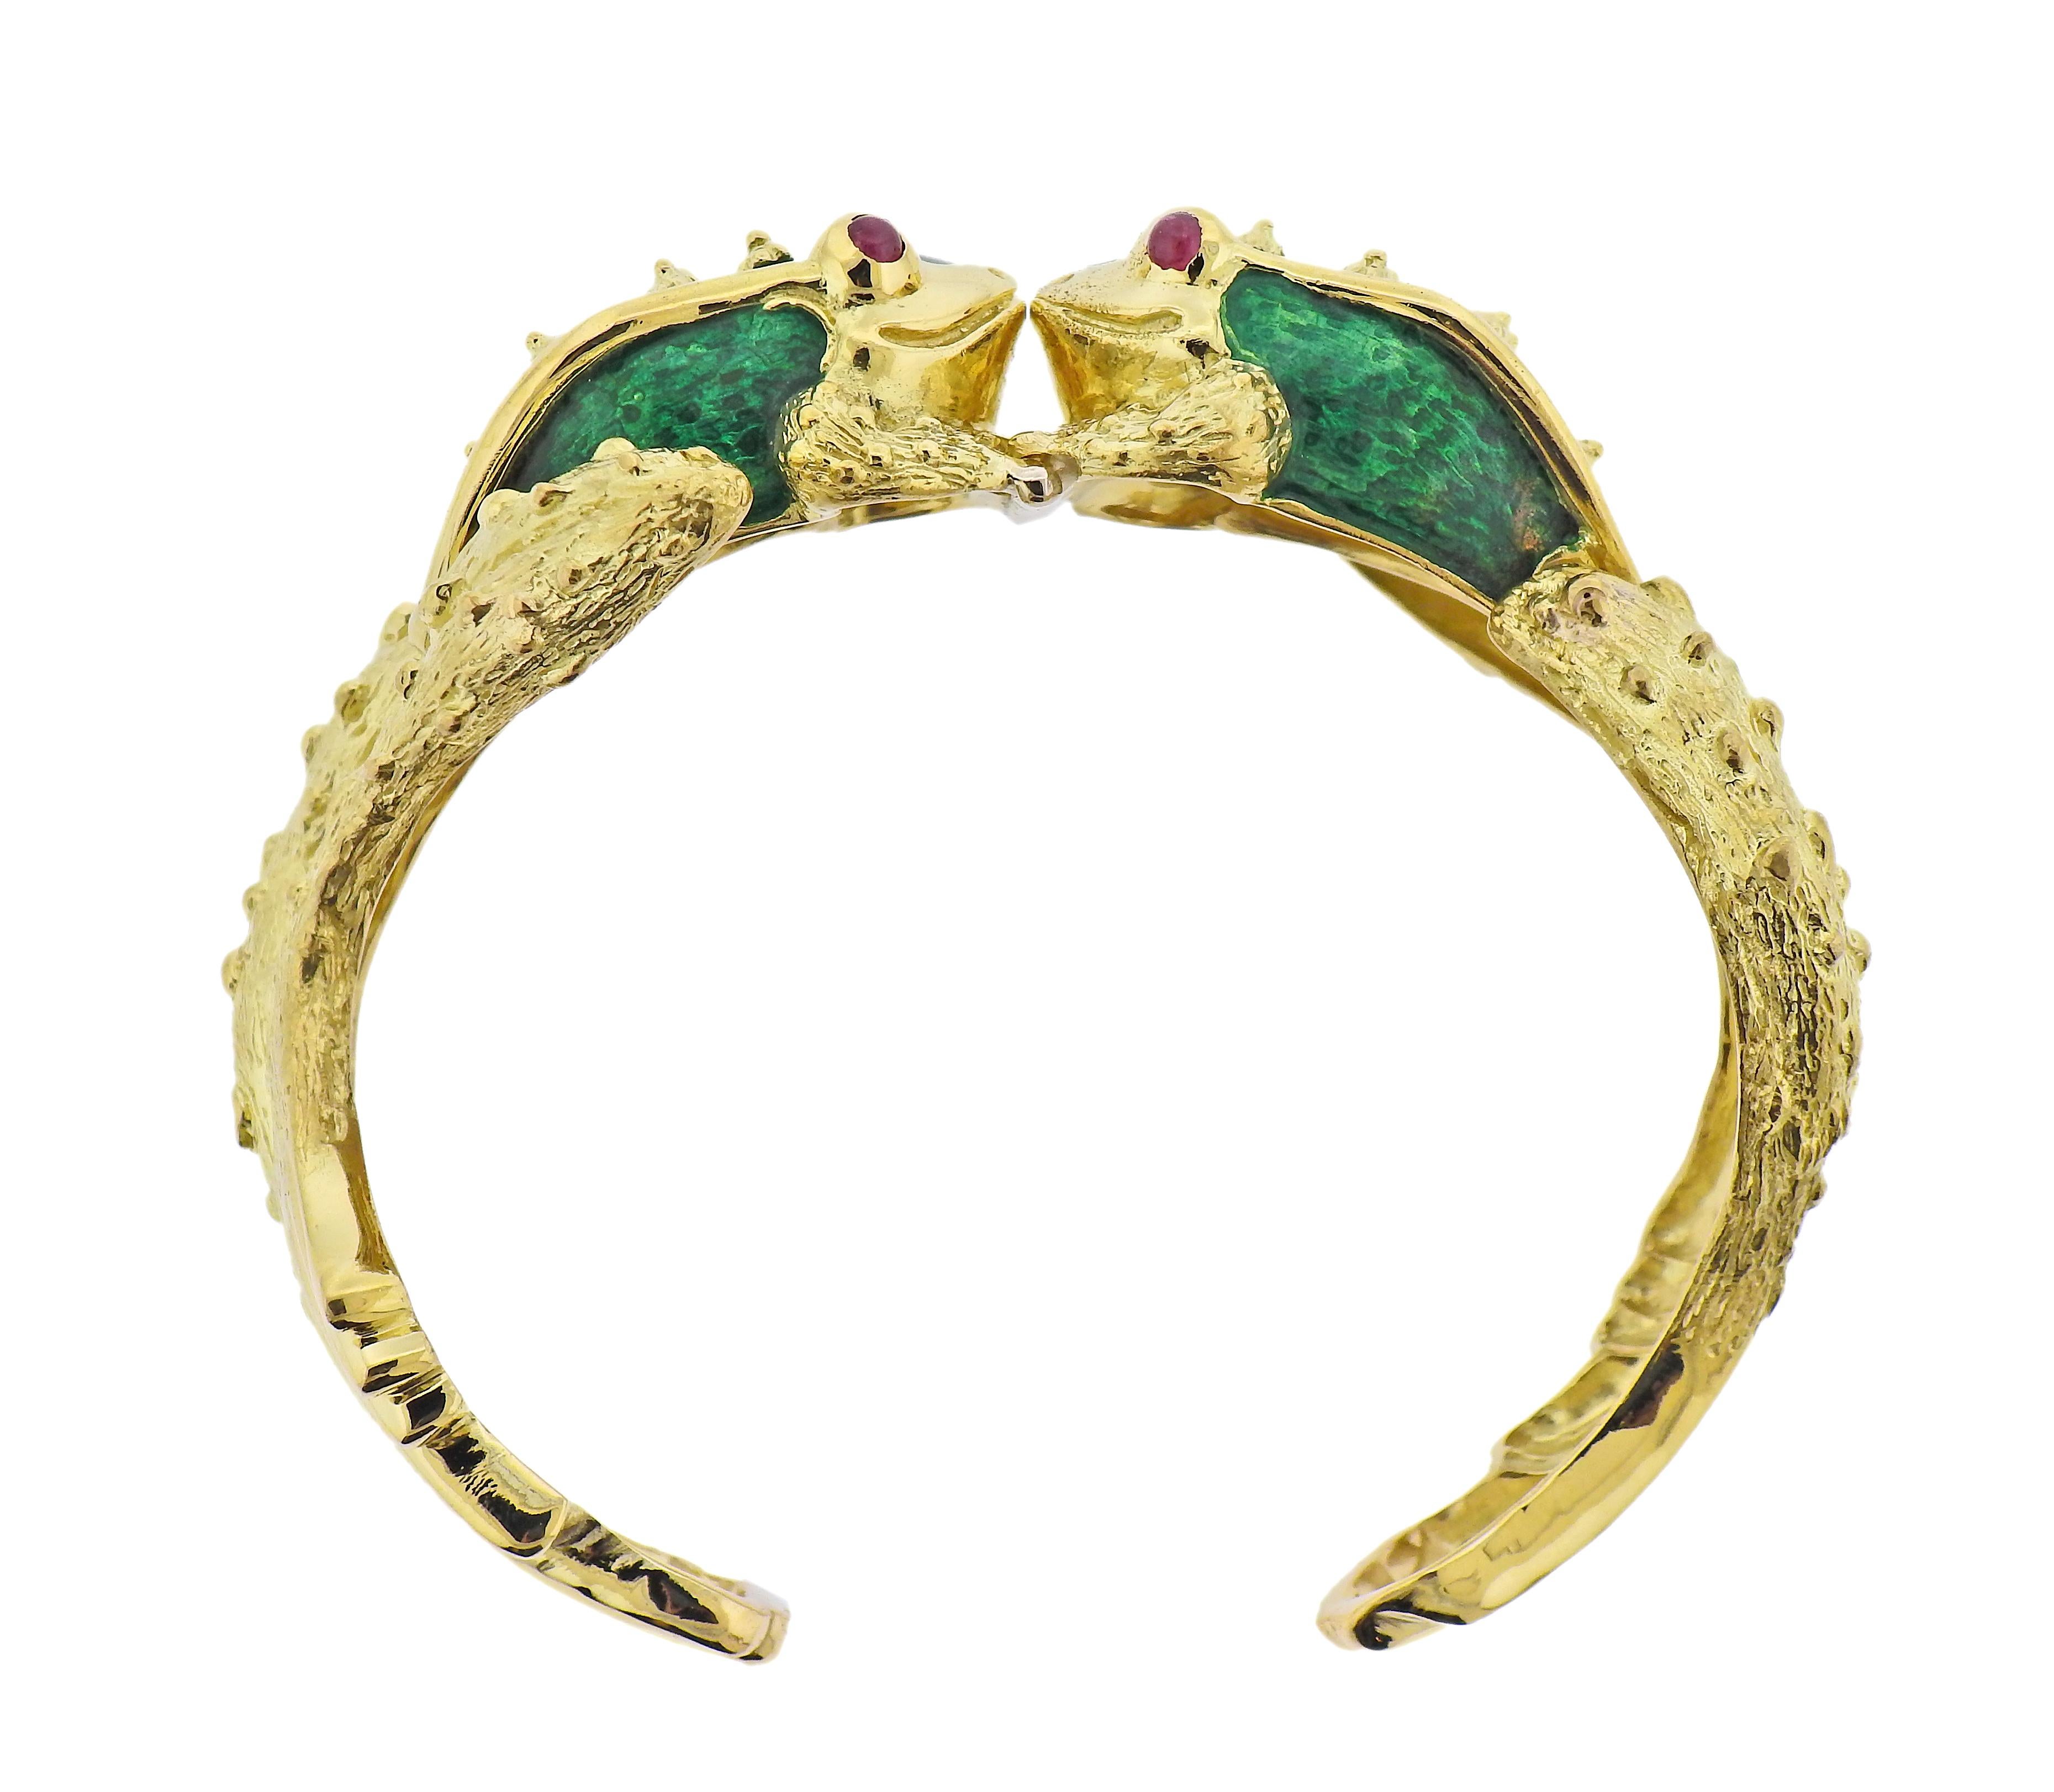 18k yellow gold cuff bracelet by Boris LeBeau, featuring enamel decorated frogs, with ruby cabochon eyes. Bracelet will fit approx. 7.5